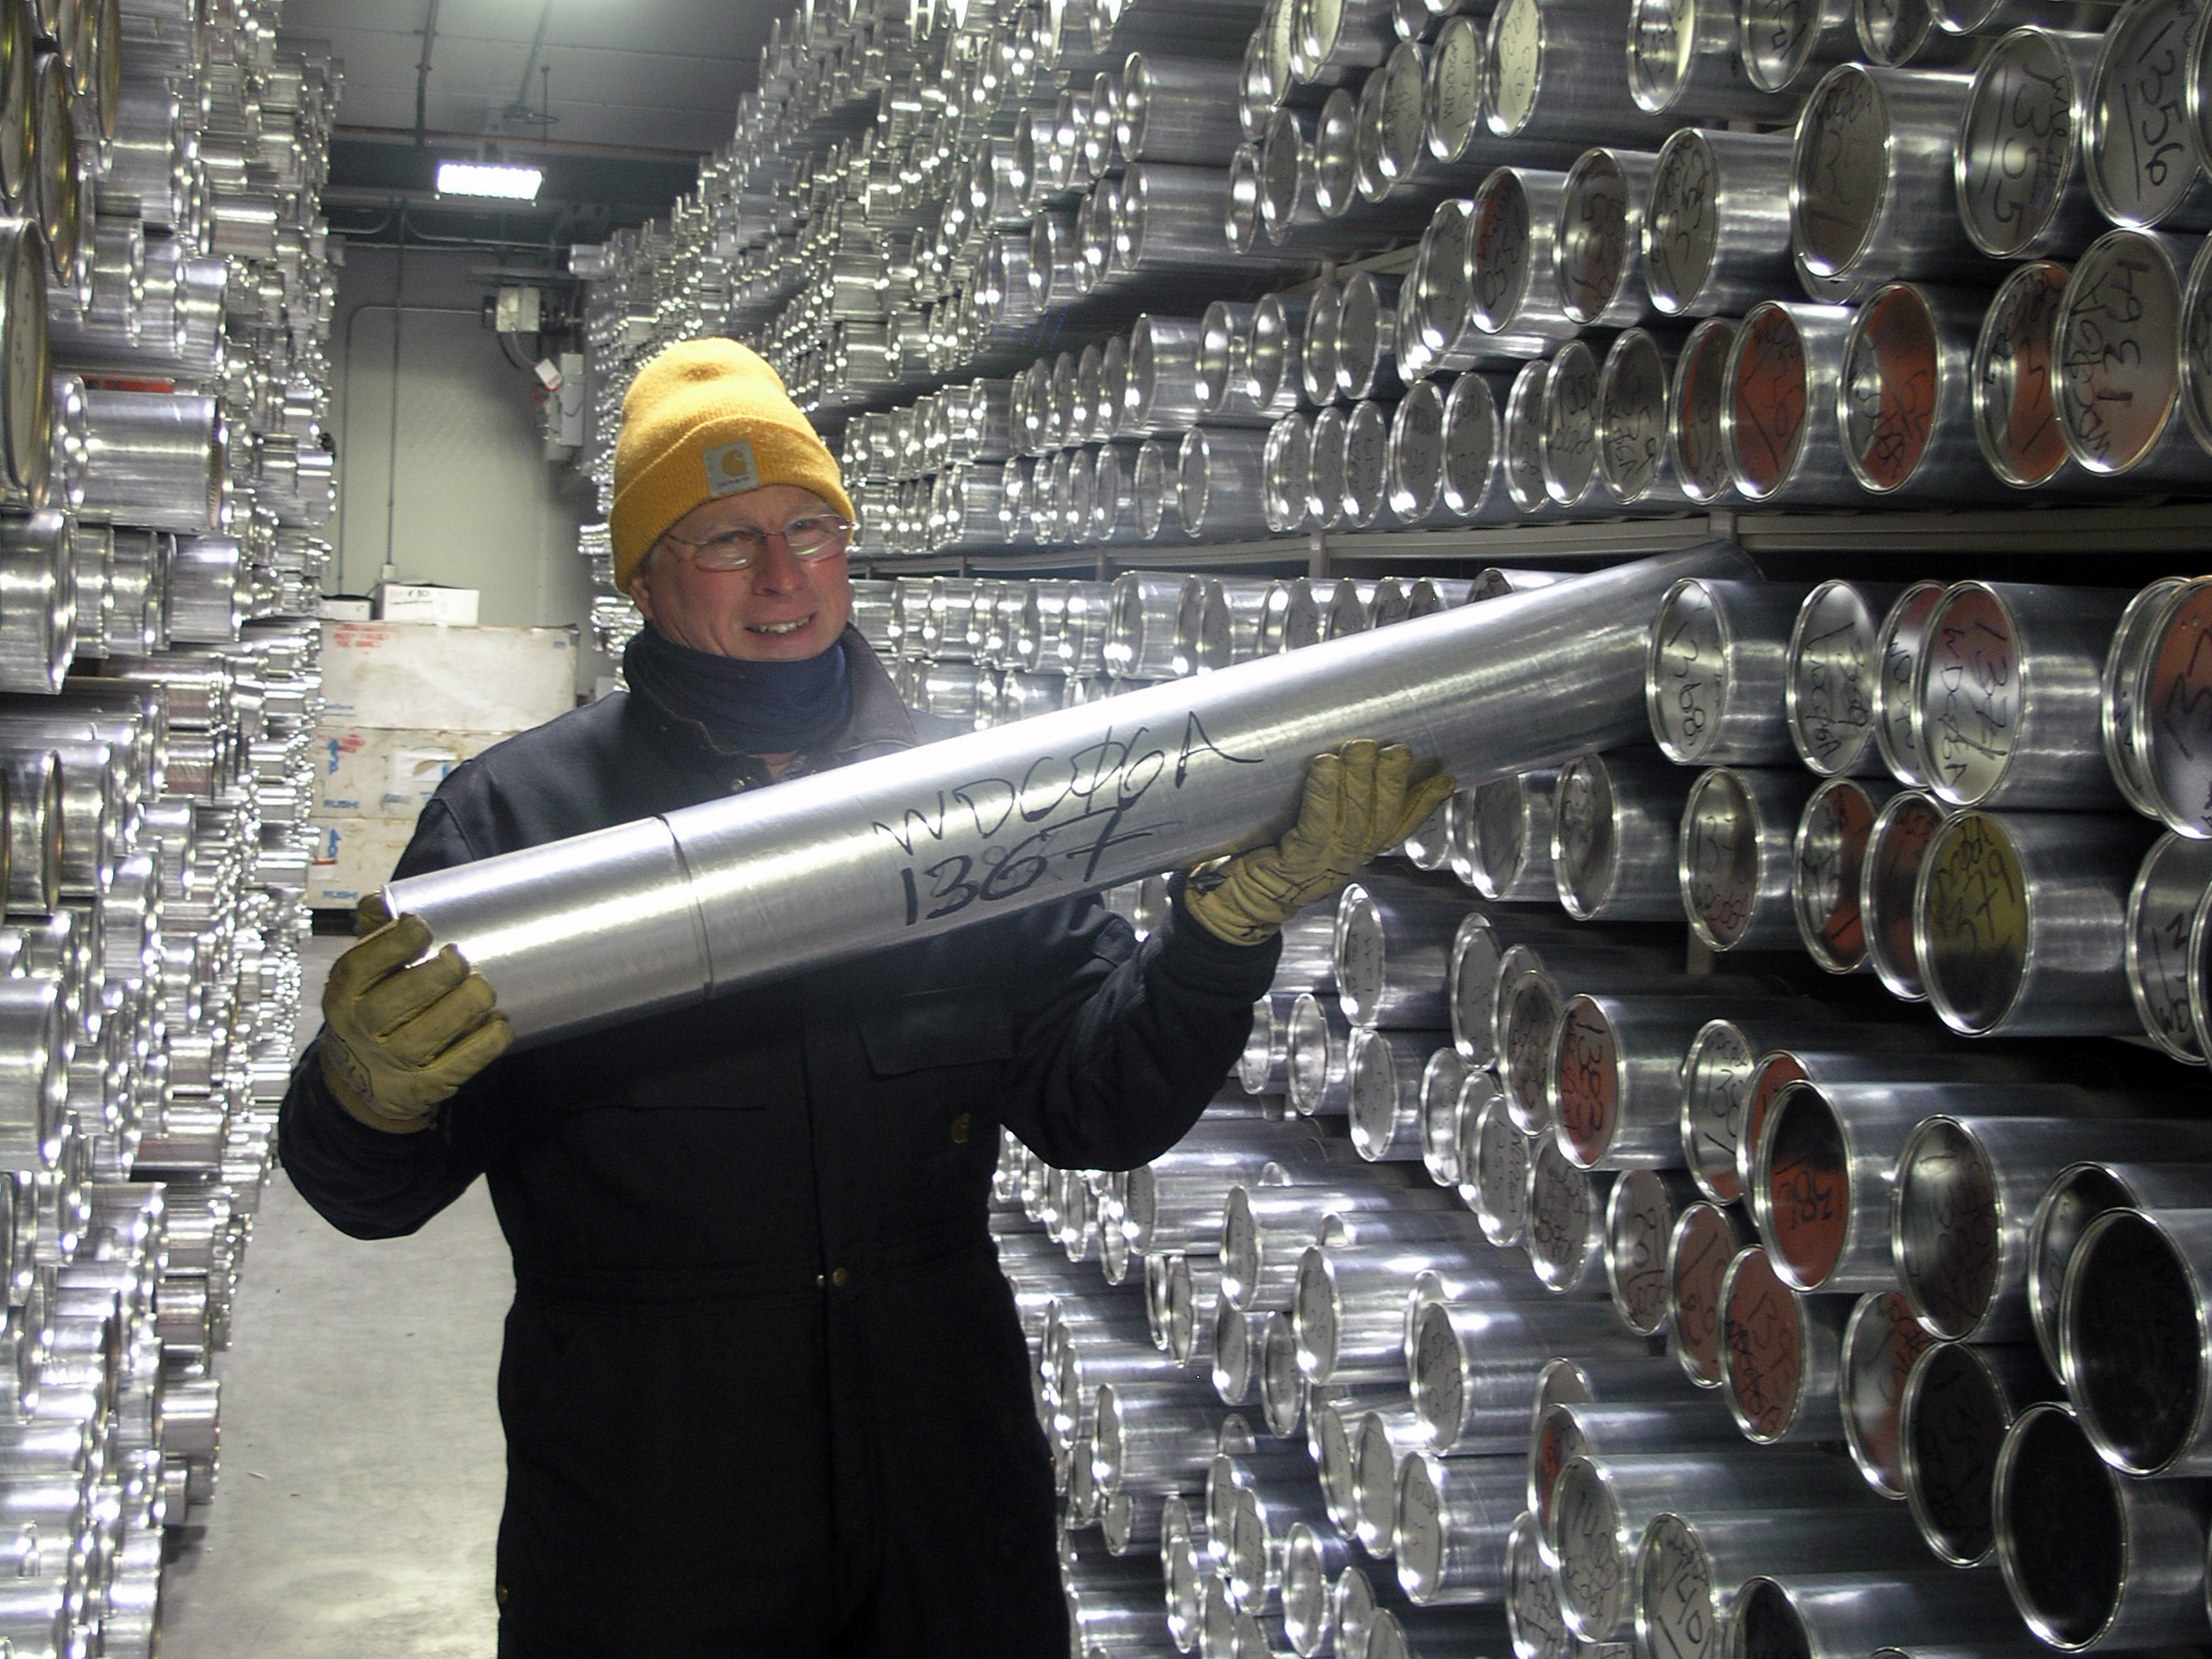 Geoff Hargreaves, Curator, inside the main archive freezer at the NSF Ice Core Facility